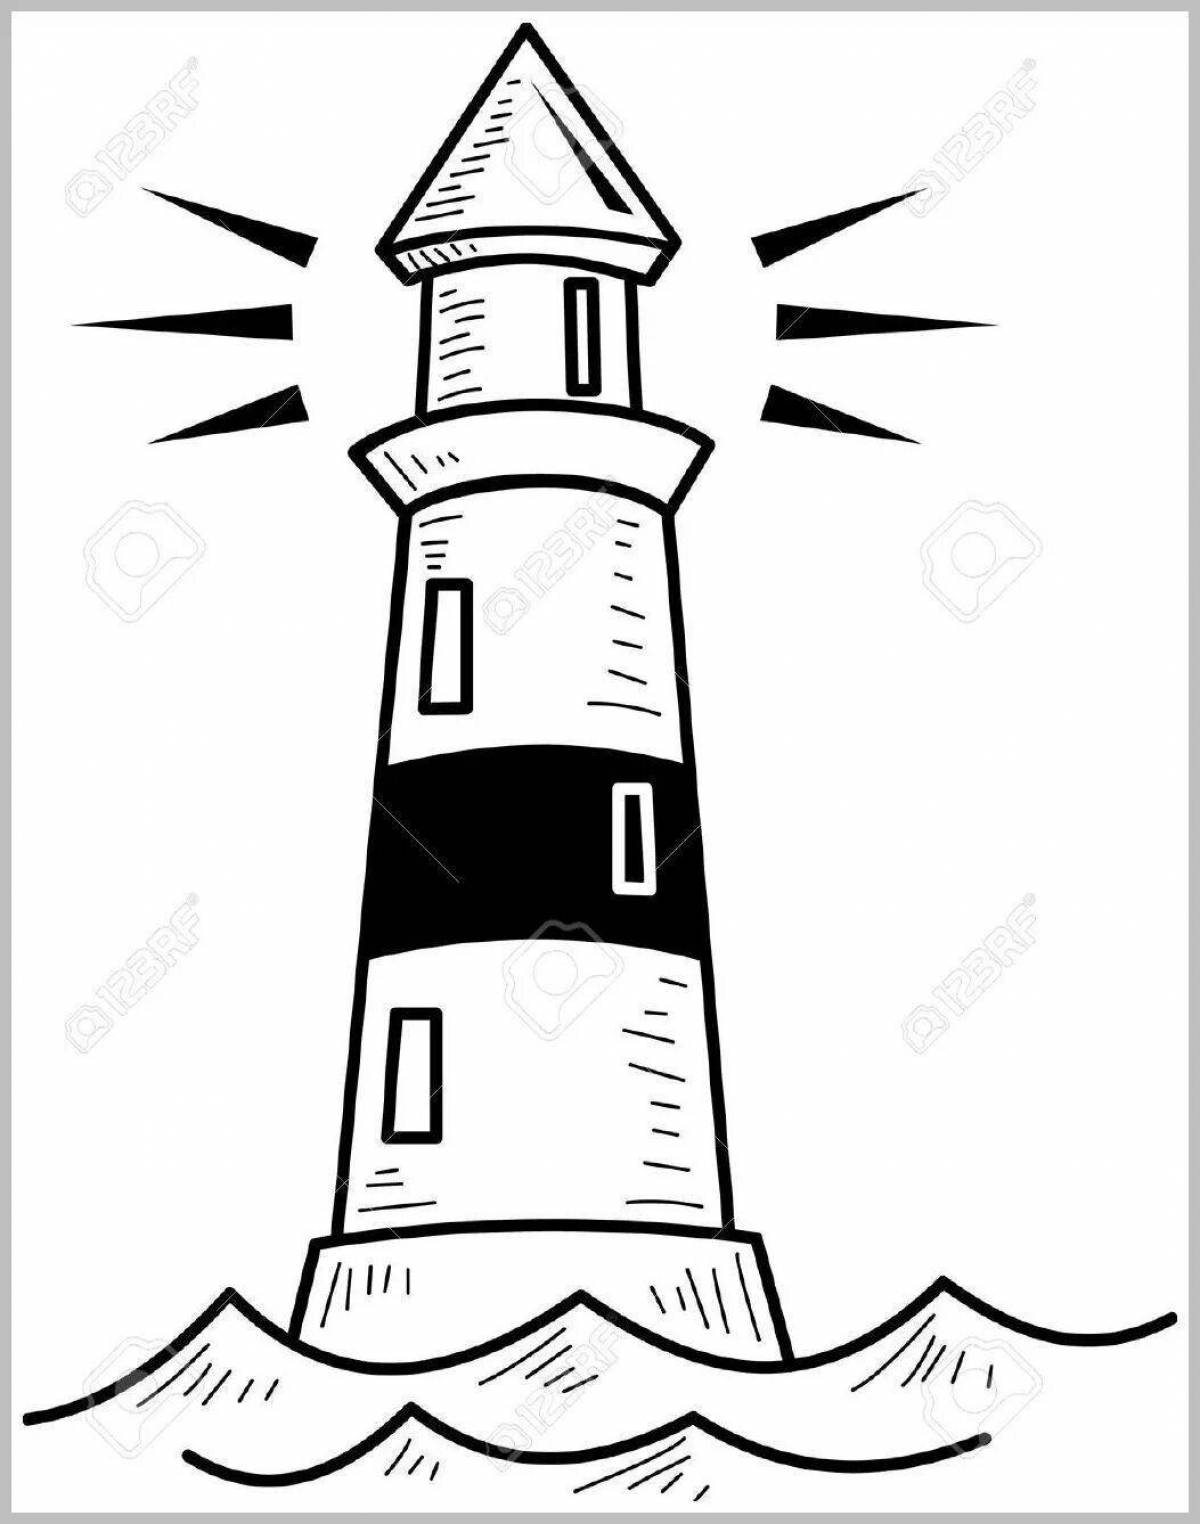 Merry lighthouse coloring book for kids